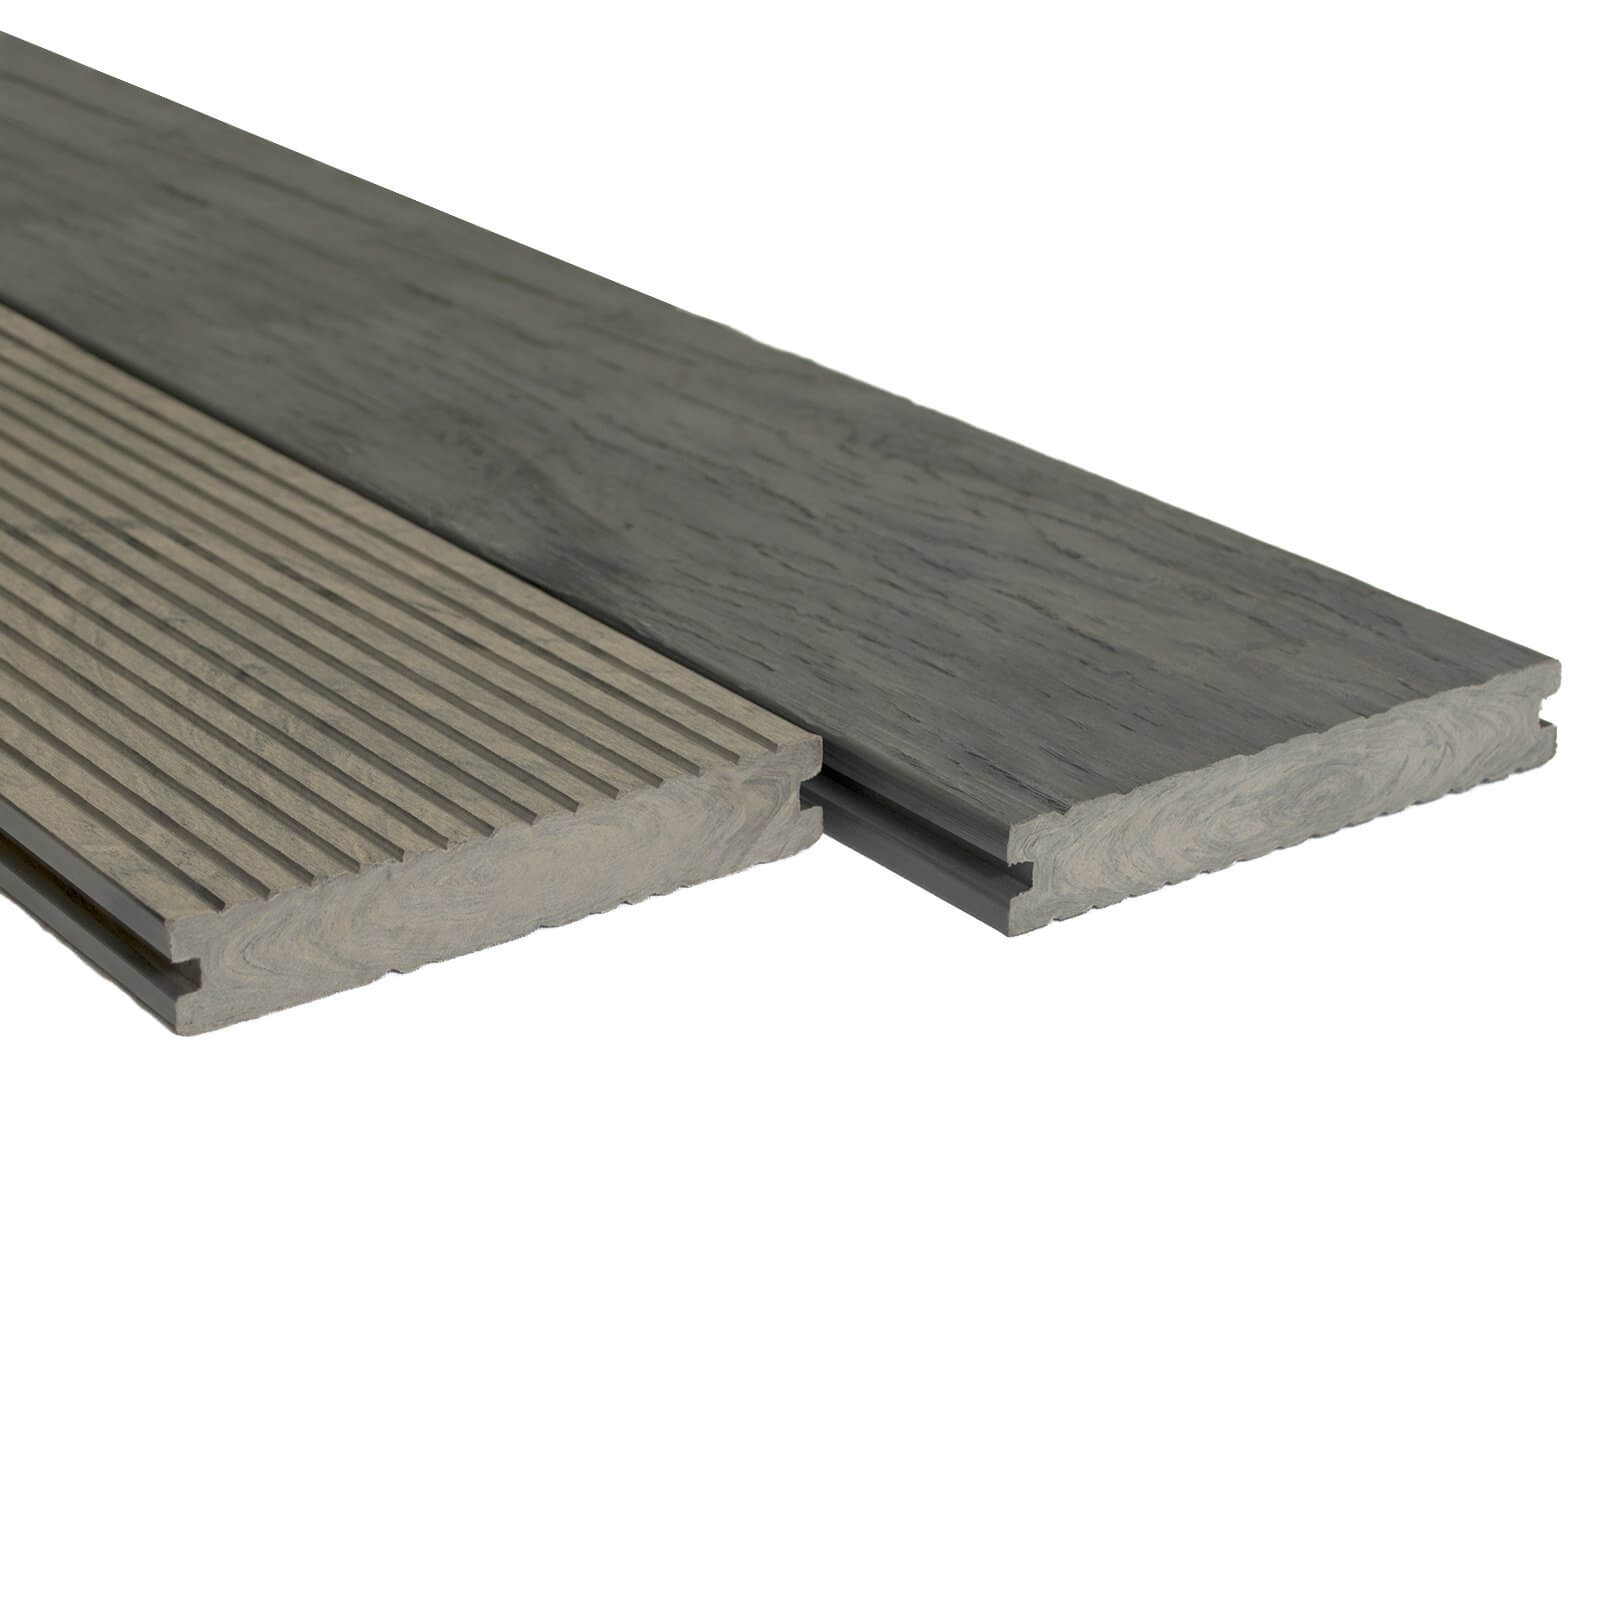 Heritage Board Composite Decking - 3 Pack - Drift - 1.12 m2